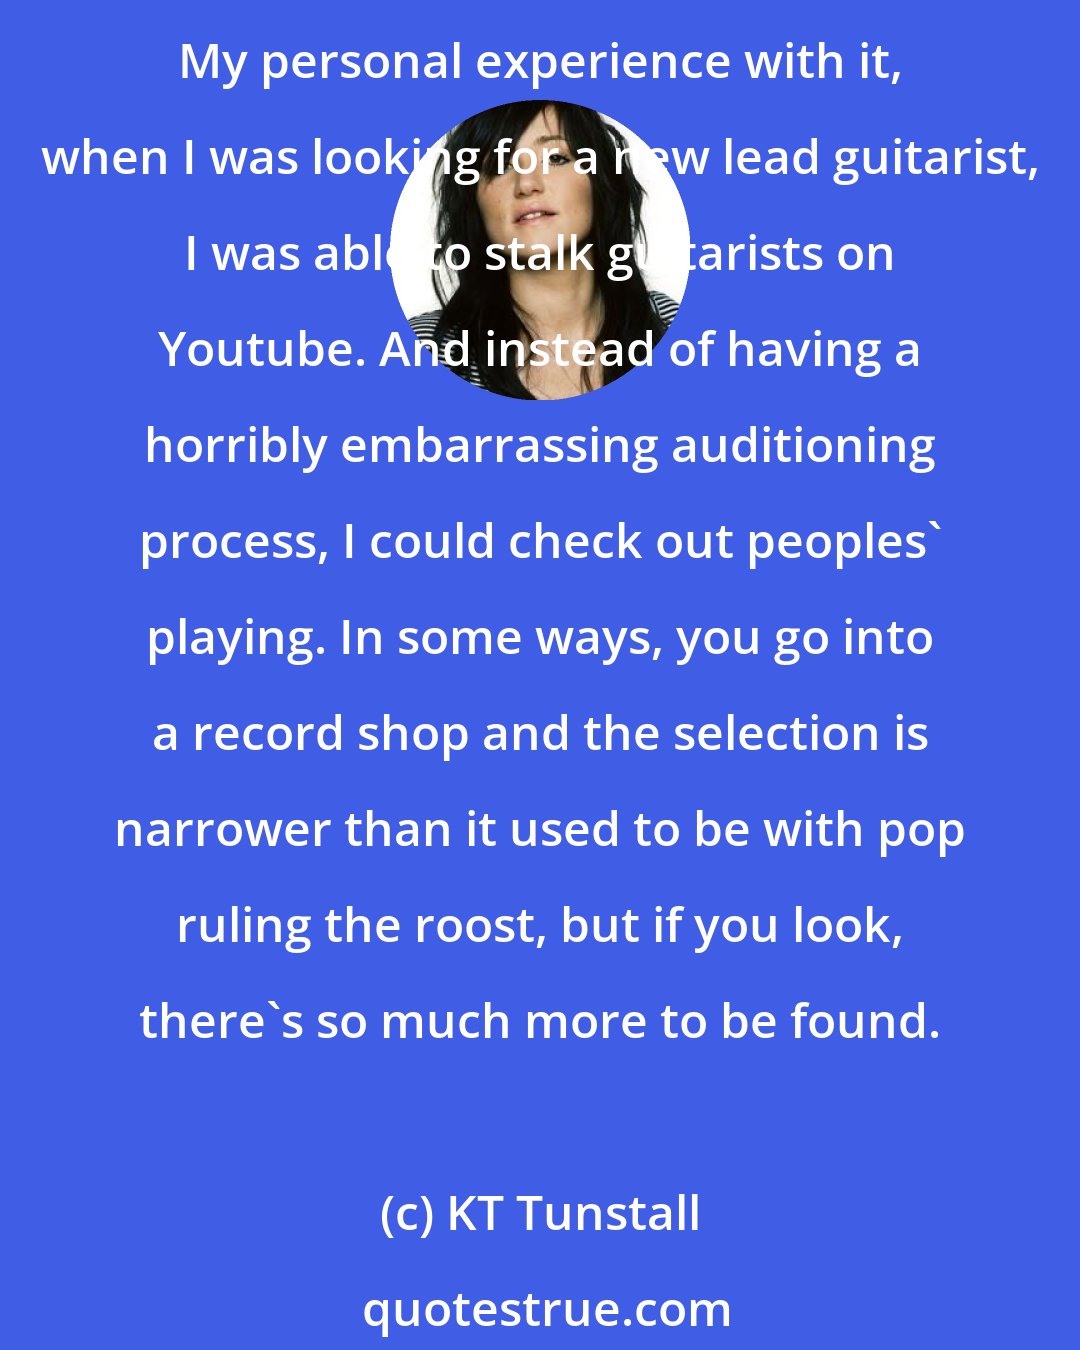 KT Tunstall: Exciting underground stuff is easier to find with YouTube than it used to be. You don't have to go to the dive bar in the bad part of town to see a band you would never usually see. My personal experience with it, when I was looking for a new lead guitarist, I was able to stalk guitarists on Youtube. And instead of having a horribly embarrassing auditioning process, I could check out peoples' playing. In some ways, you go into a record shop and the selection is narrower than it used to be with pop ruling the roost, but if you look, there's so much more to be found. 